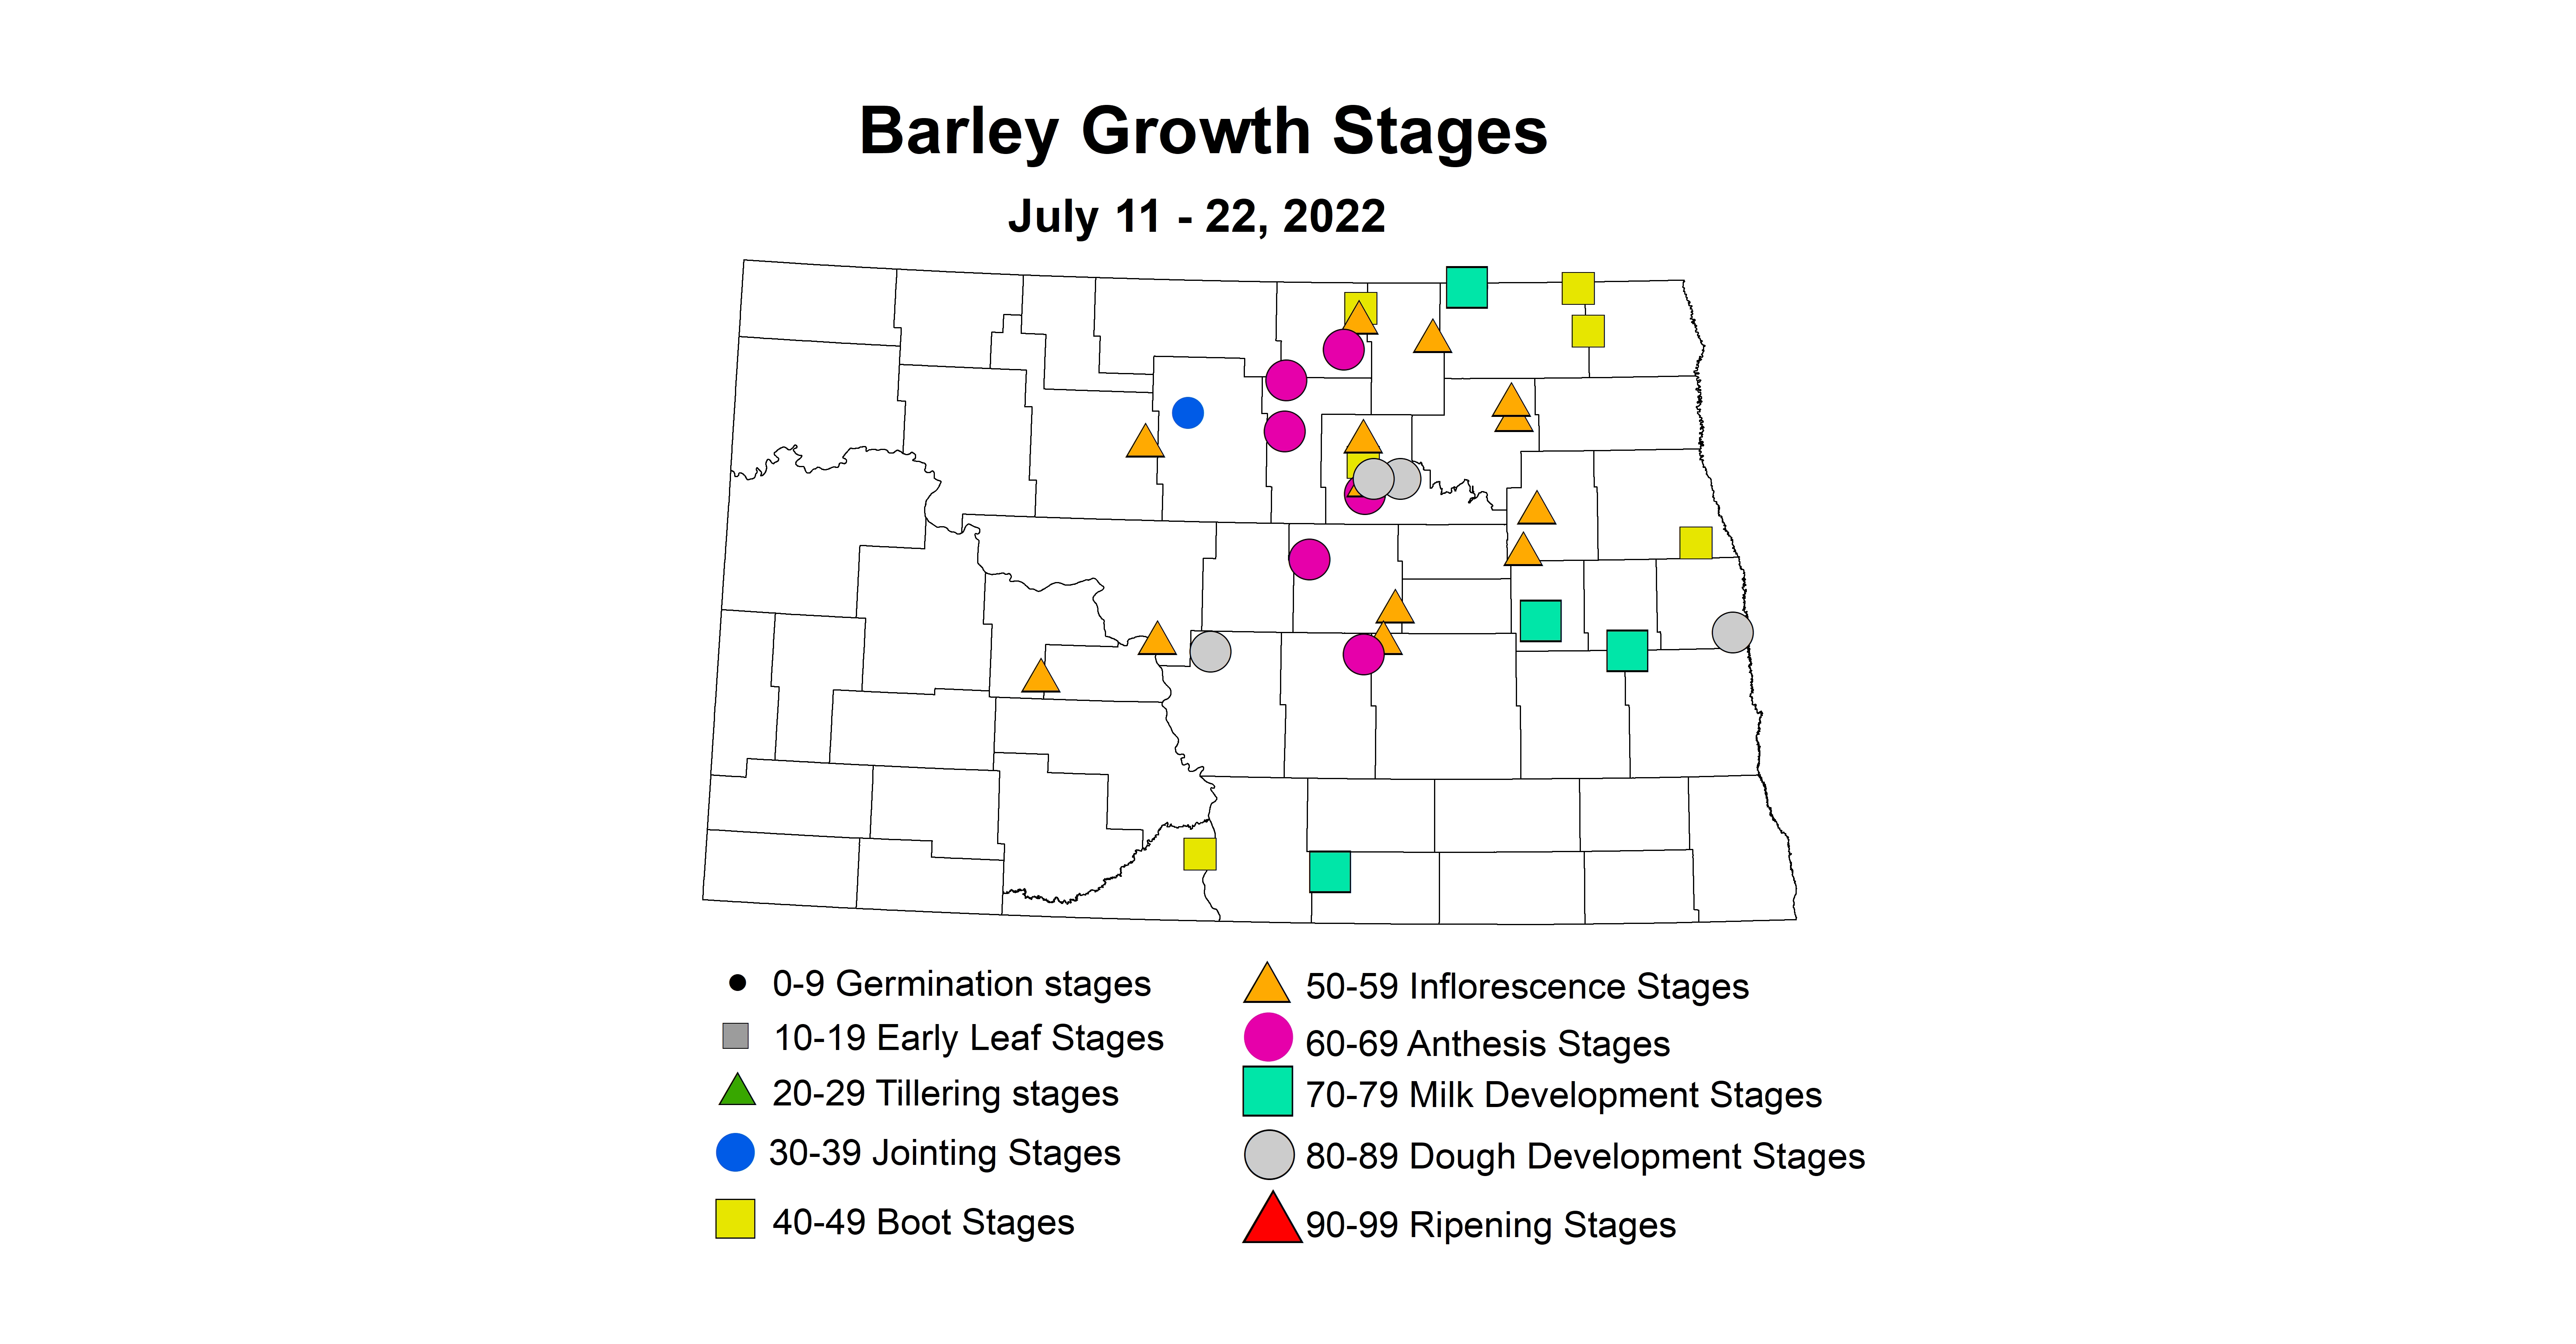 barley growth stages 2022-7.11-7.22